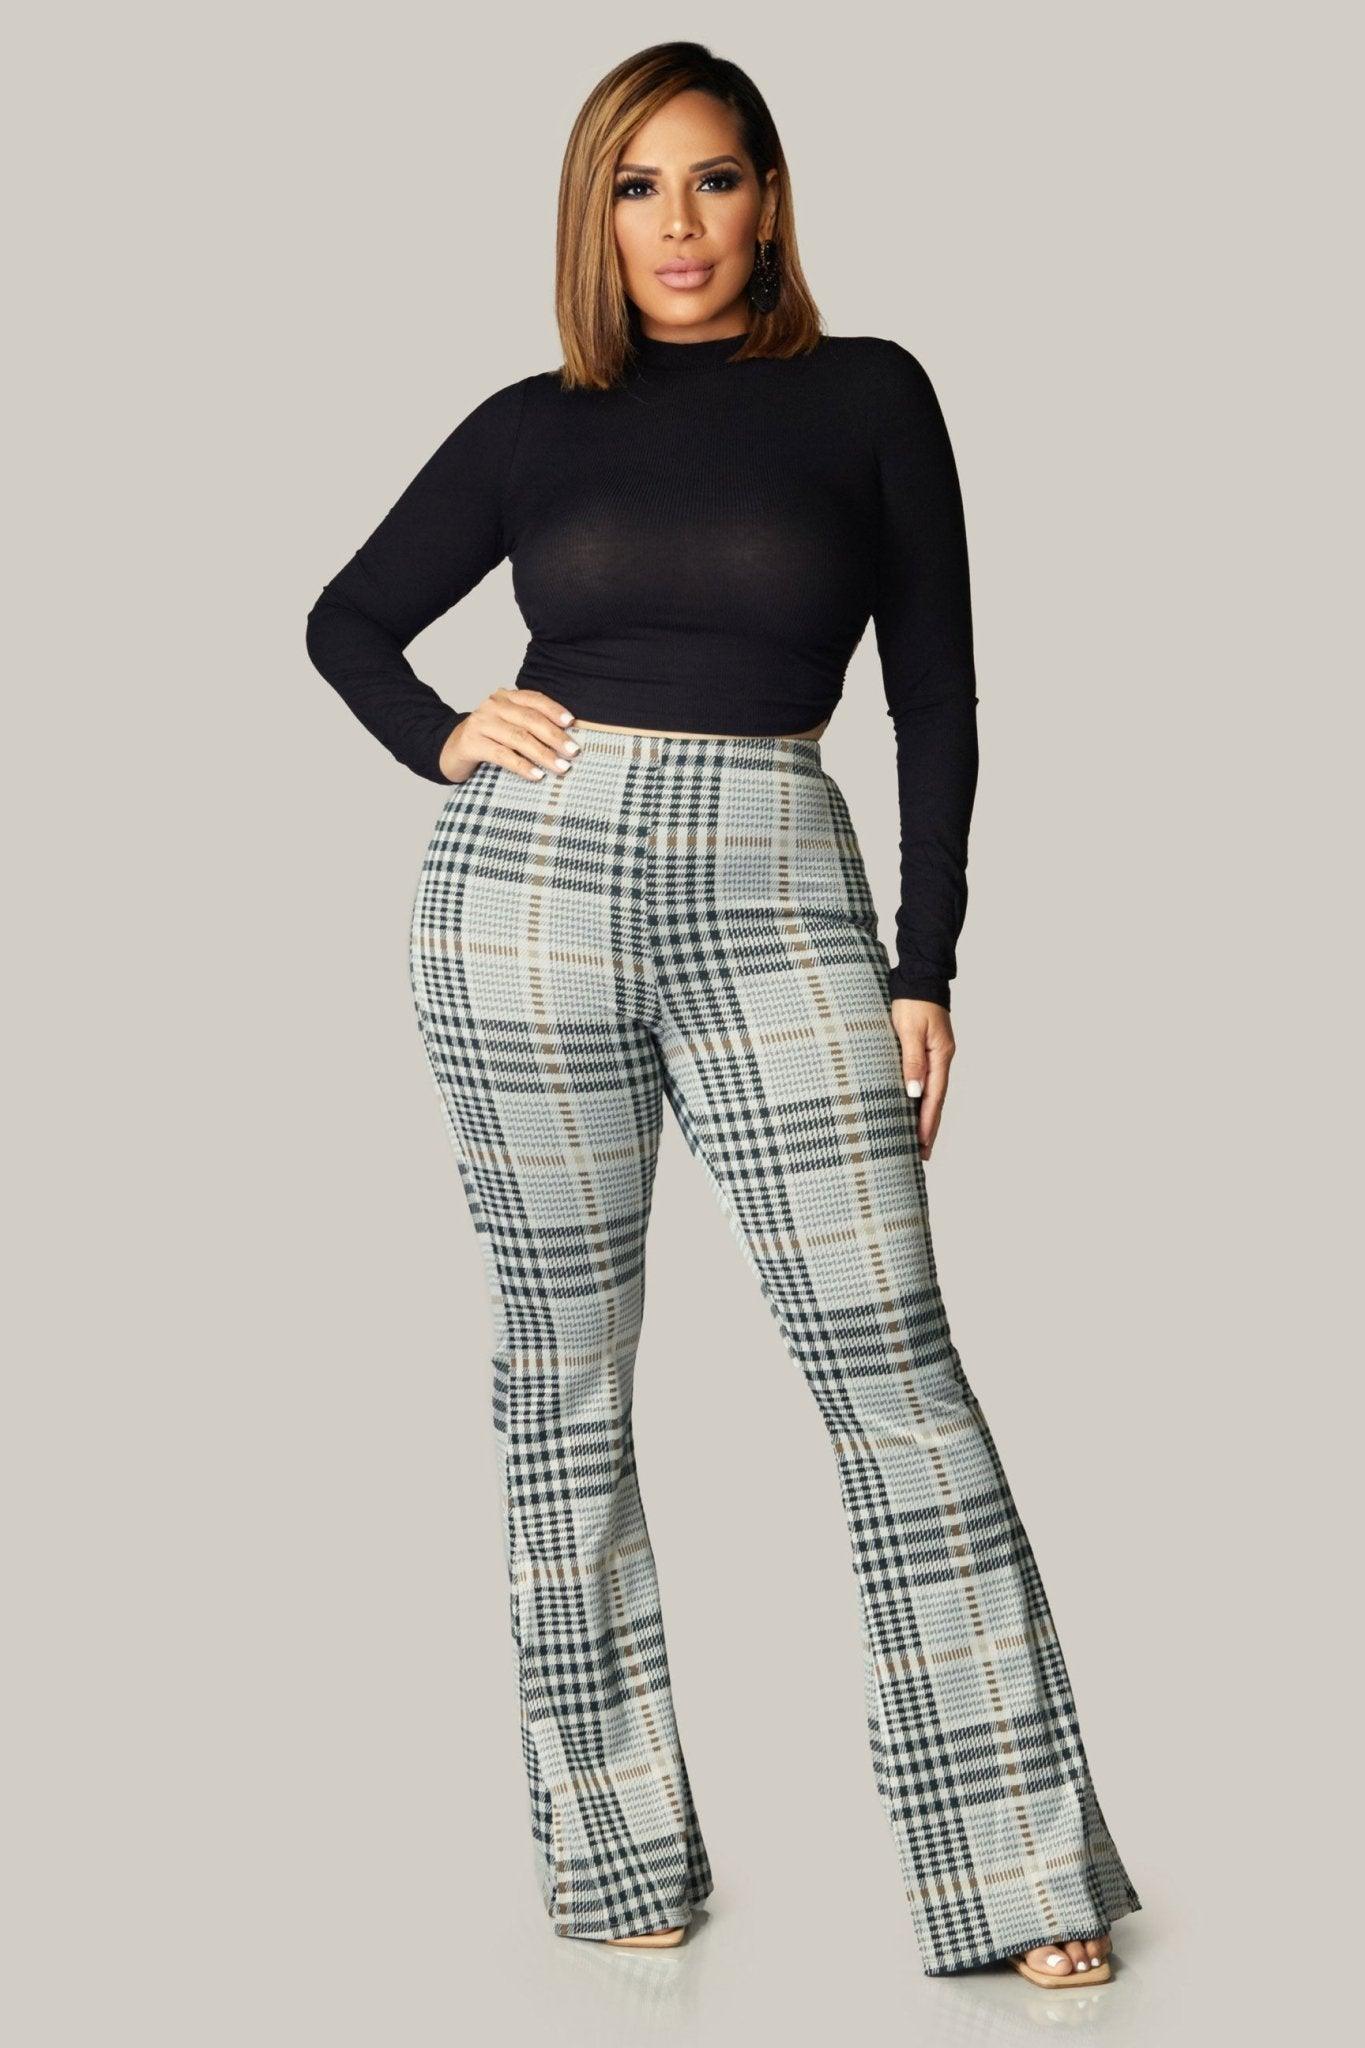 PLAID PRINTED FLARED LONG PANTS - MY SEXY STYLES